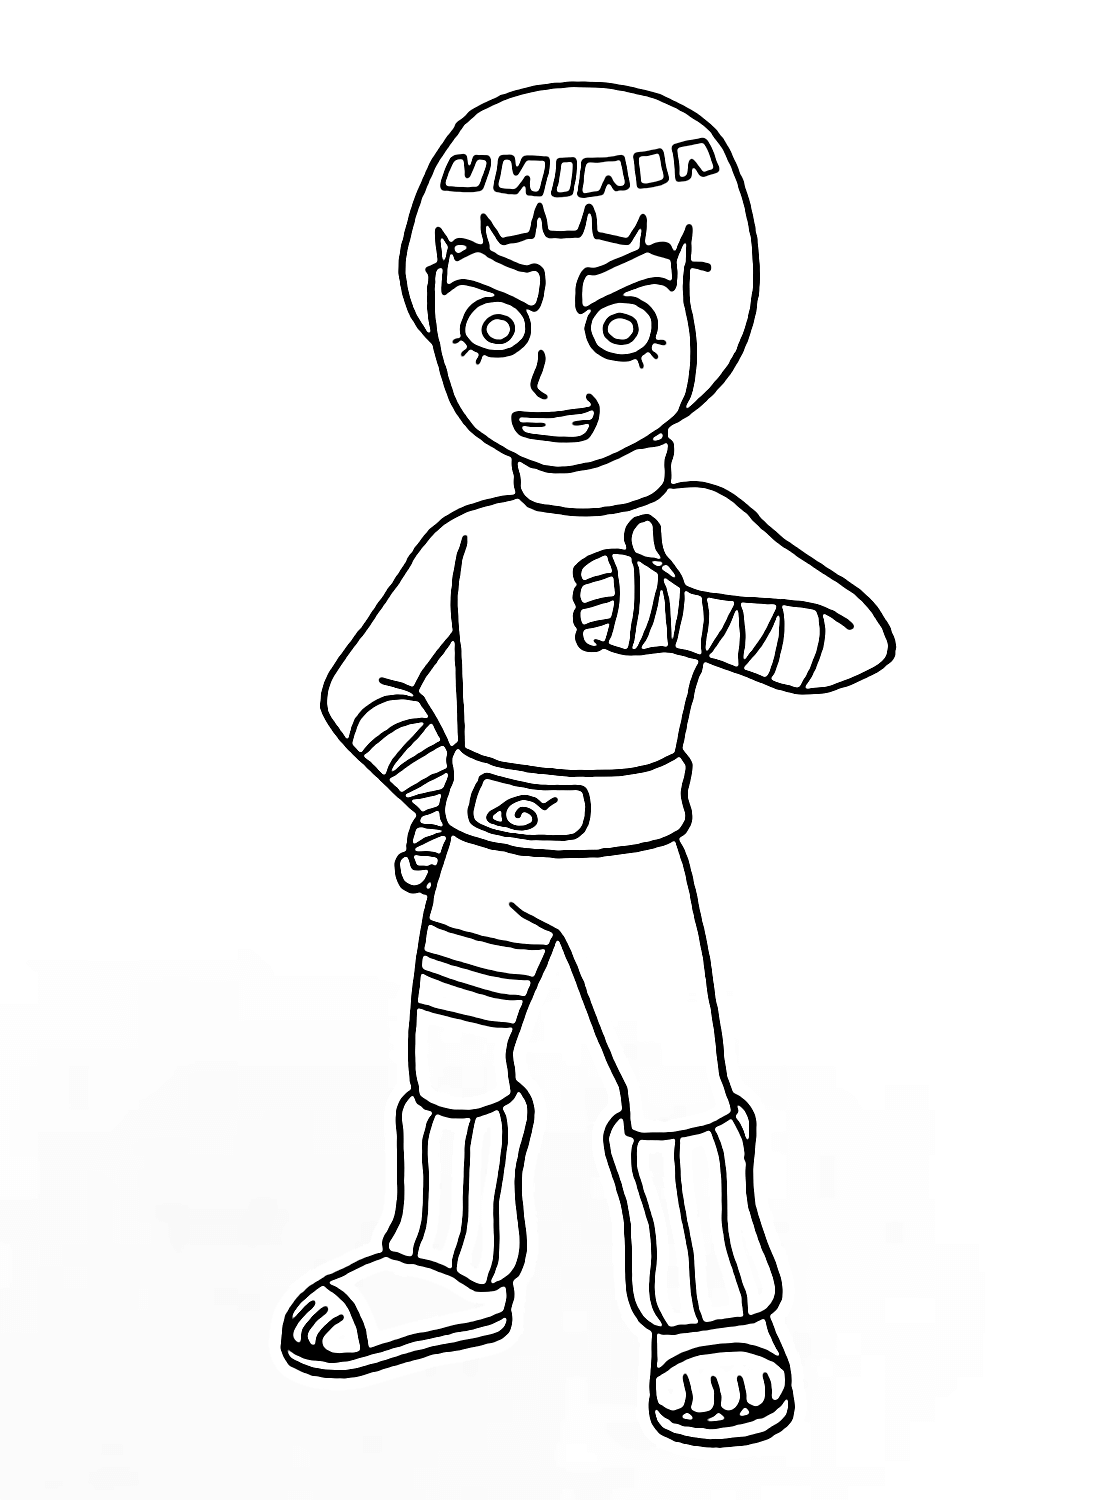 Printable Coloring Page Rock Lee - Free Printable Coloring Pages